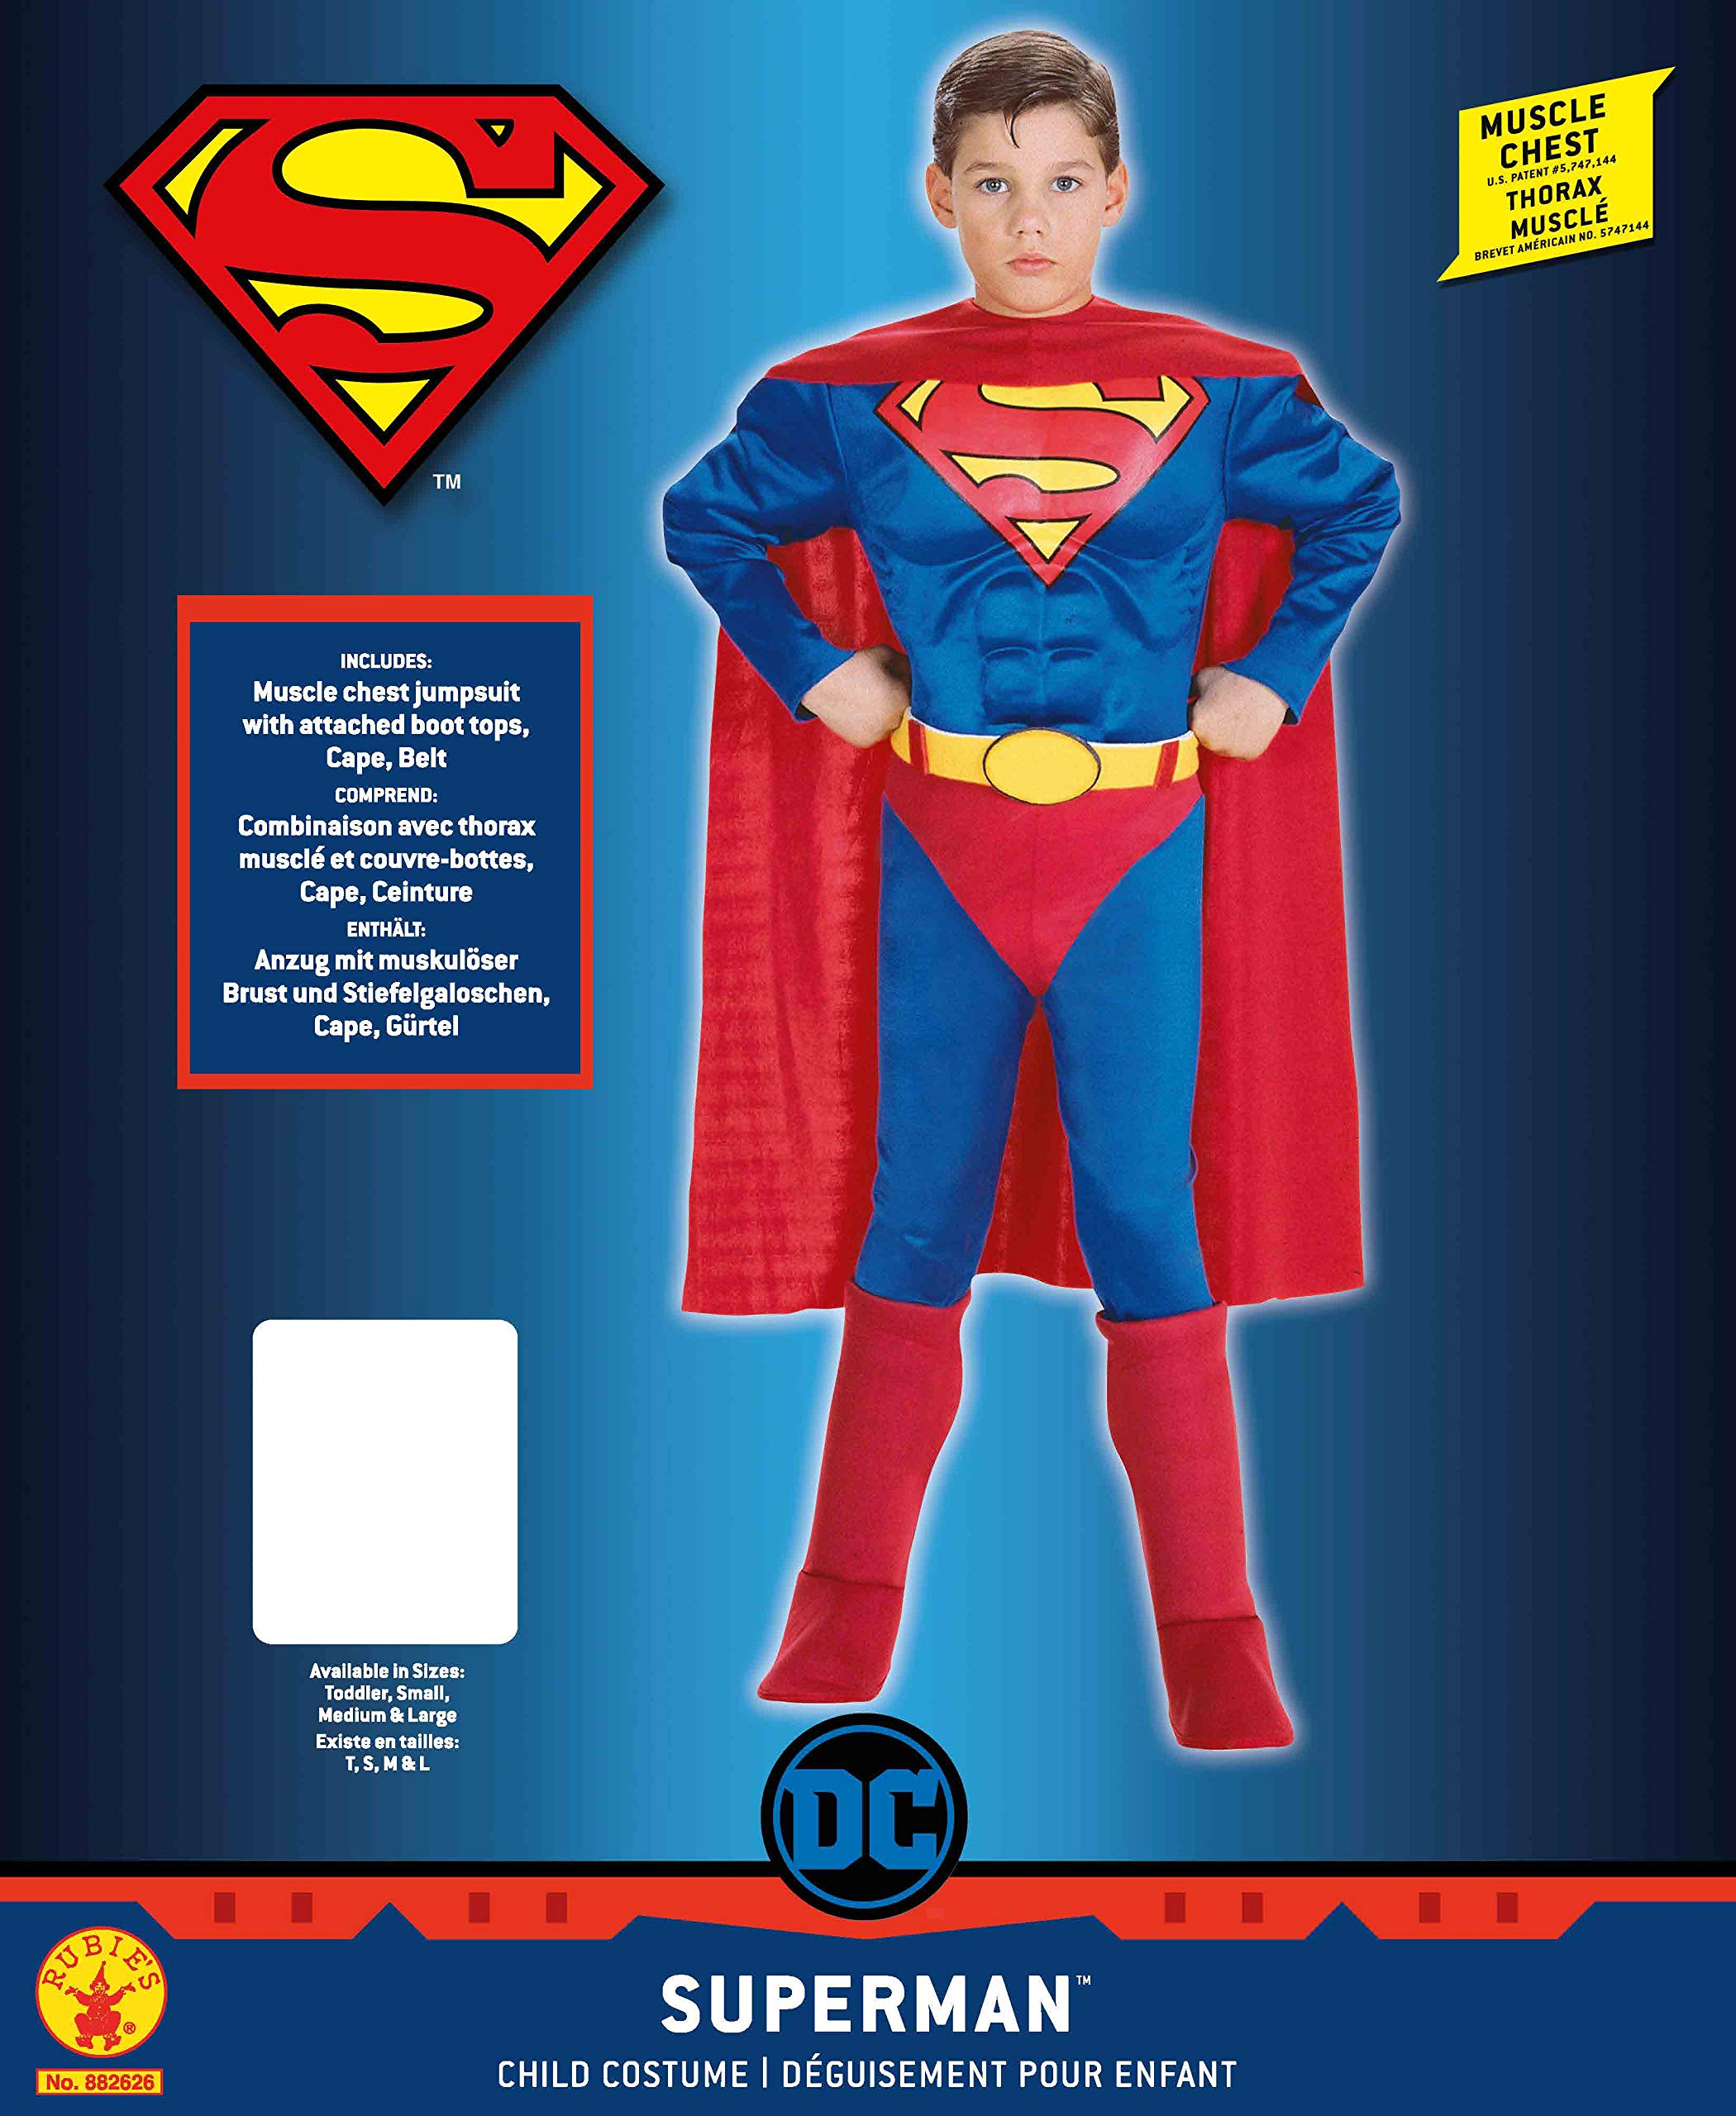 Super DC Heroes Deluxe Muscle Chest Superman Costume, Child's Medium